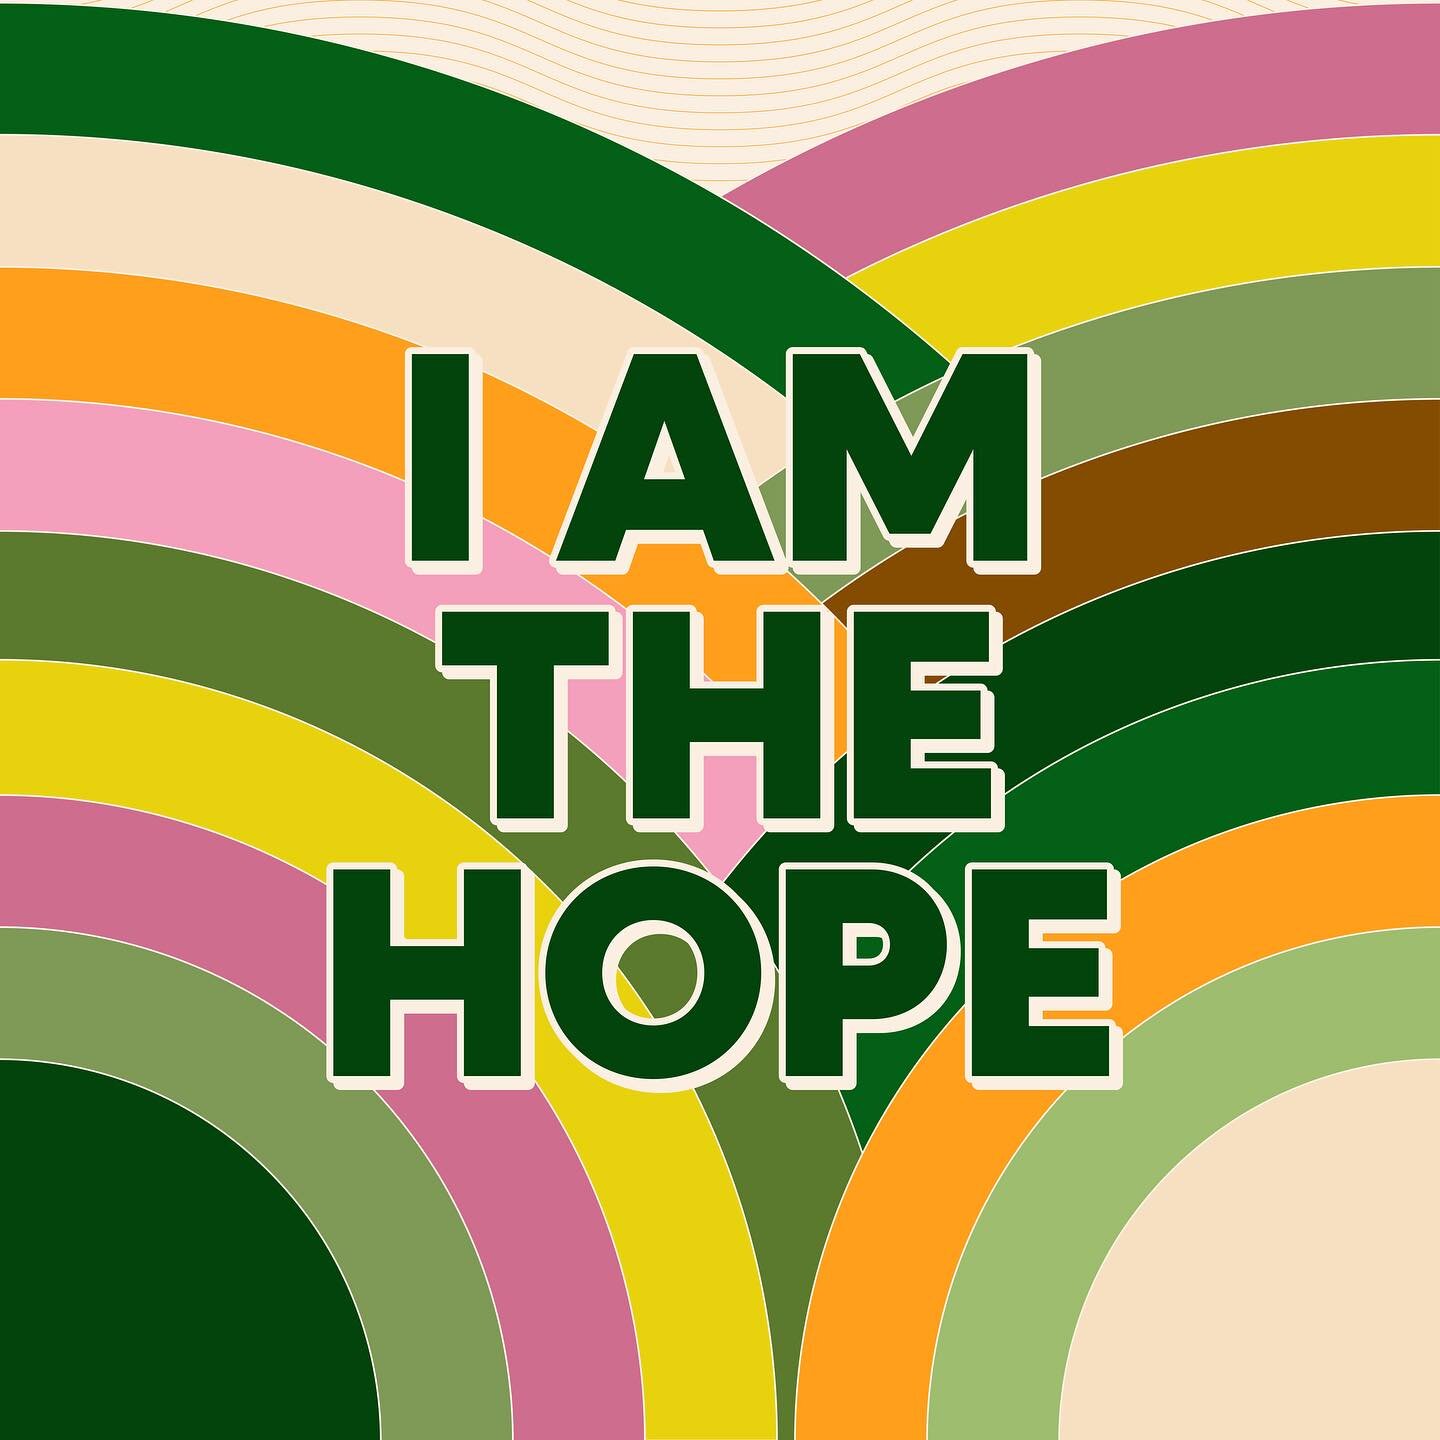 I Am the Hope! Dharma Project&rsquo;s first ever fundraising event is taking place at All Life is Yoga this Thursday night, Nov 2nd, from 7-9p. Link in Bio to RSVP to this free event. 

Through an evening of food, drink, music, and art, let&rsquo;s c